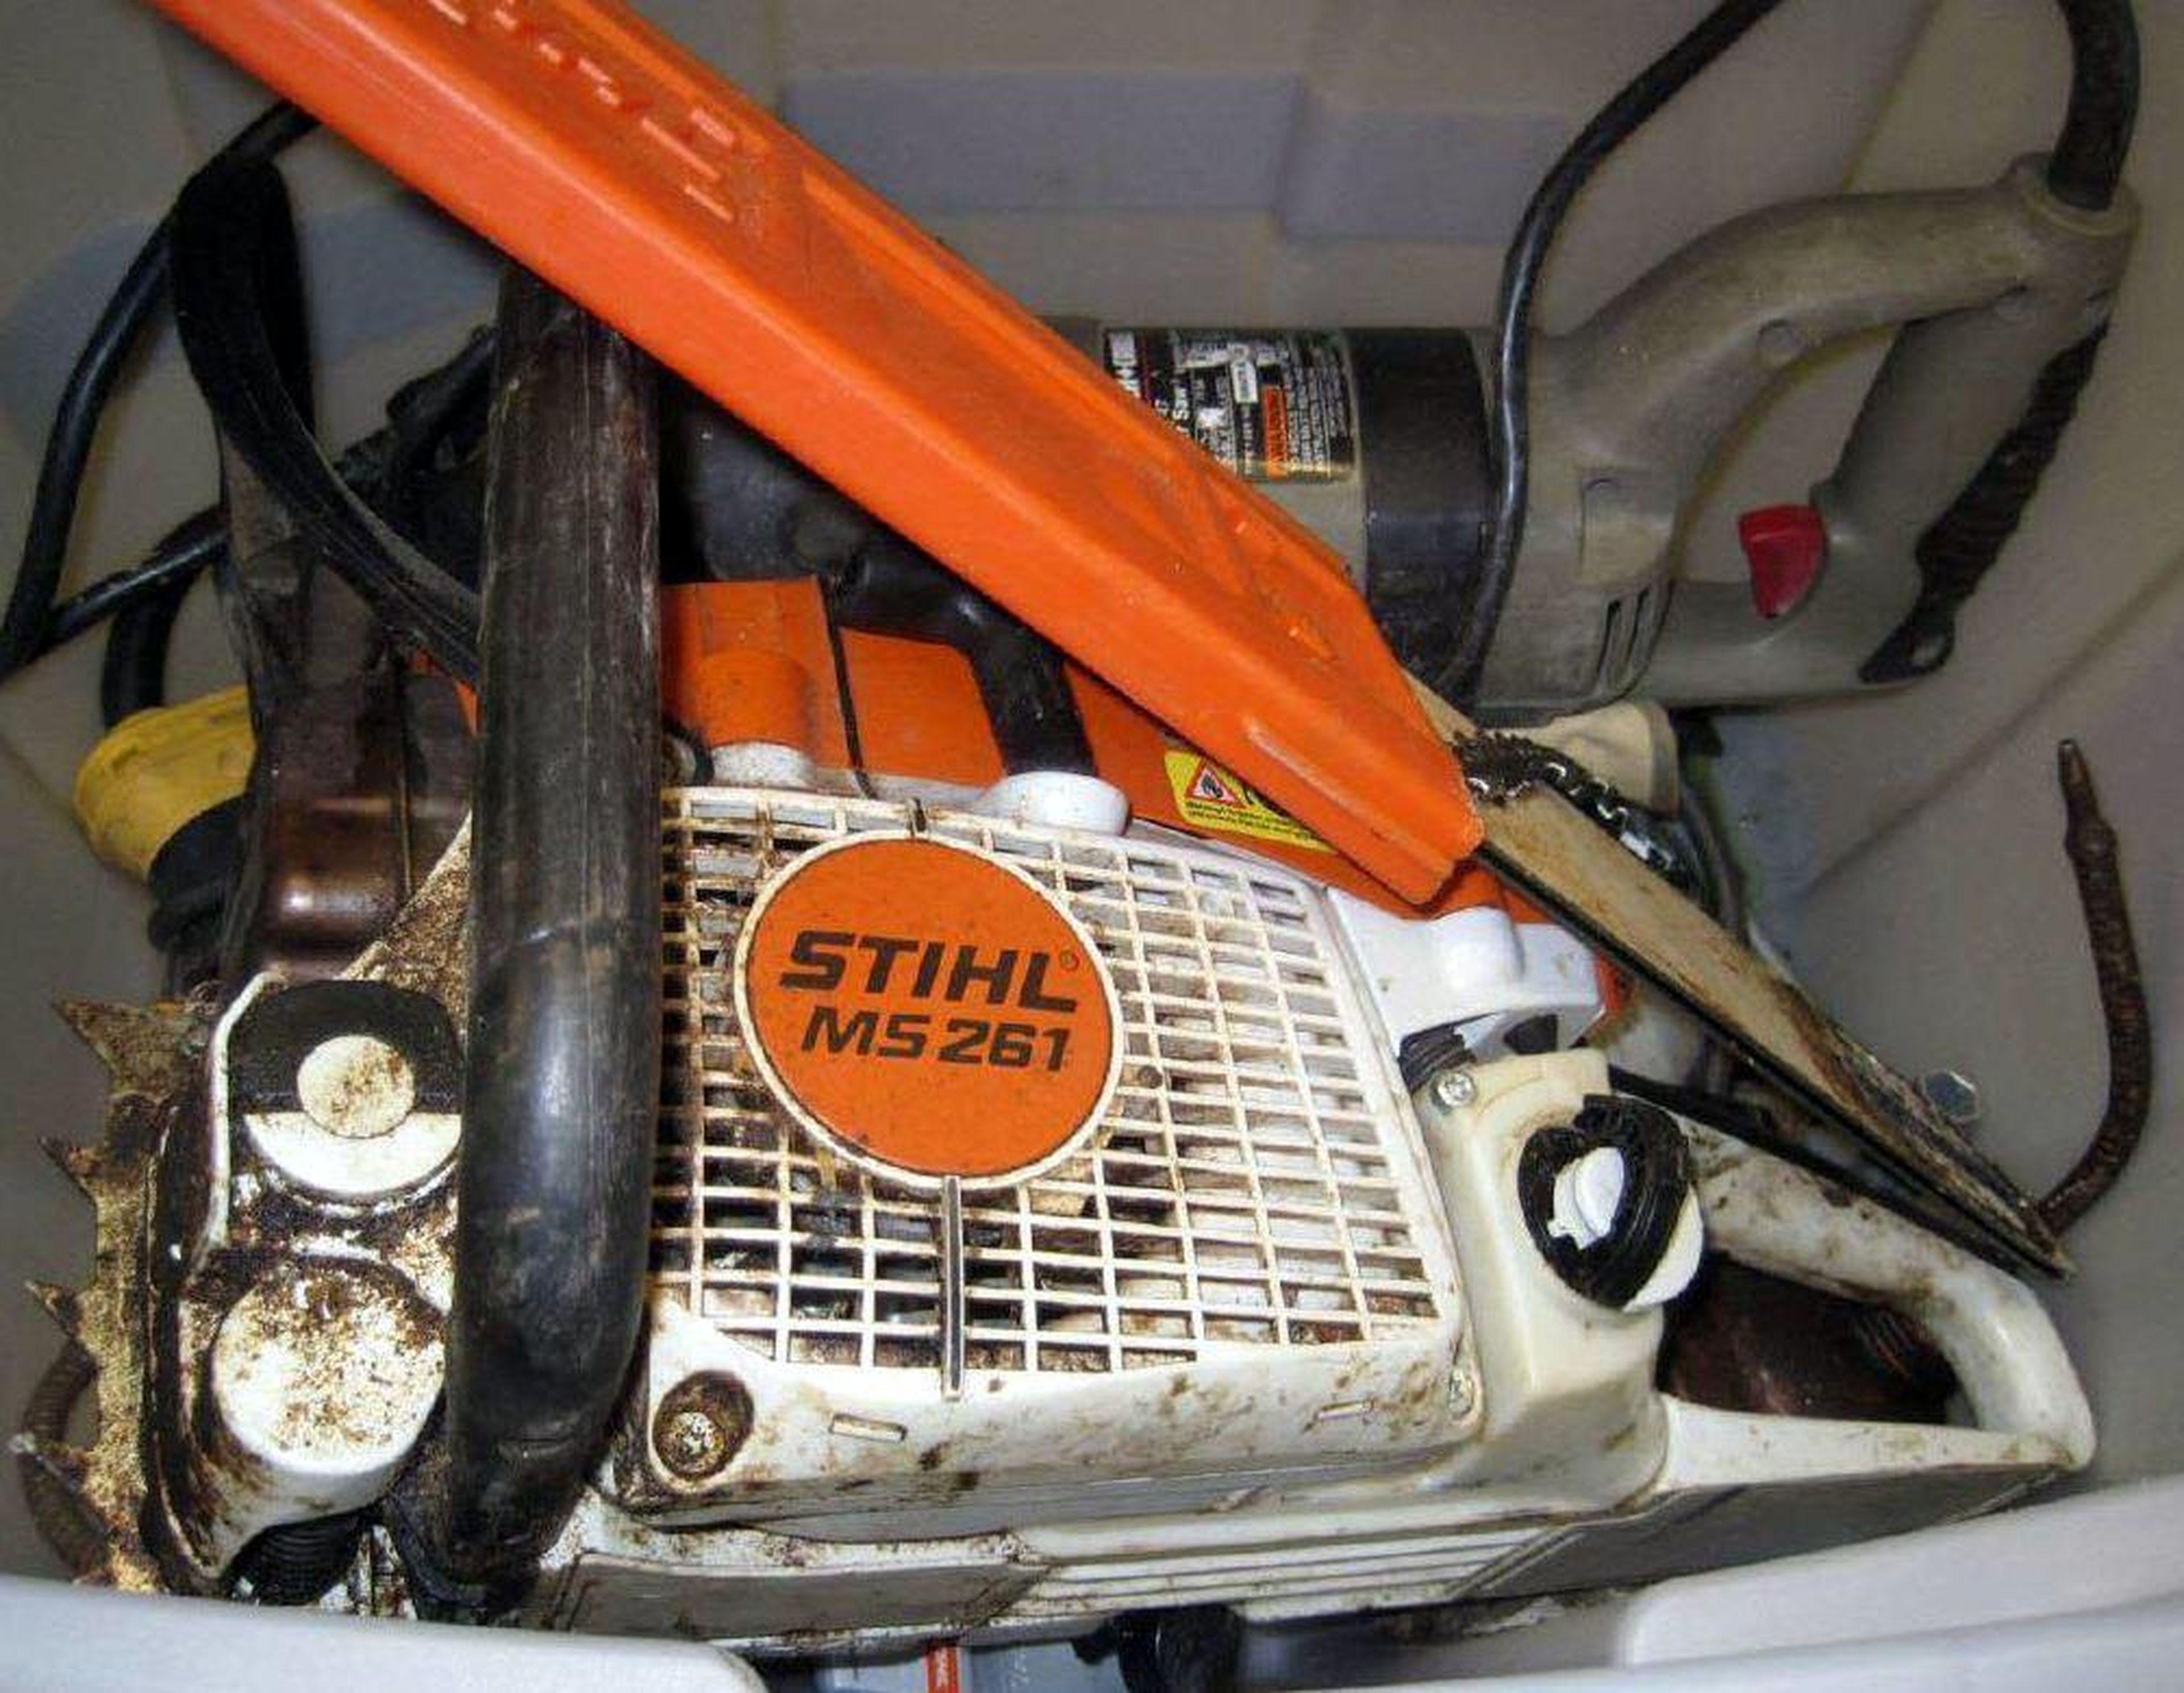 7. A fully-fueled chainsaw in checked luggage